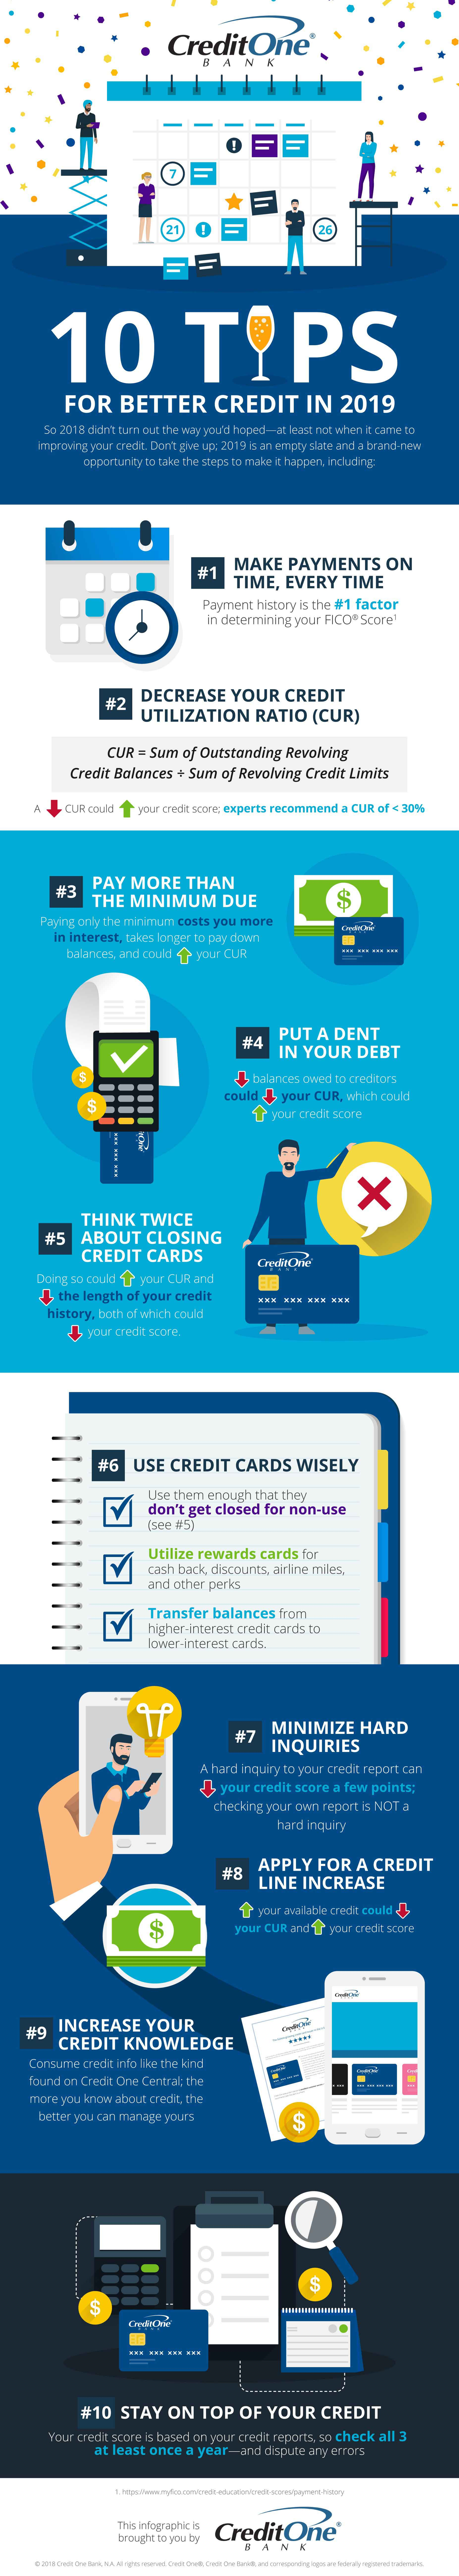 List of 10 tips for better credit in 2019 [Infographic]